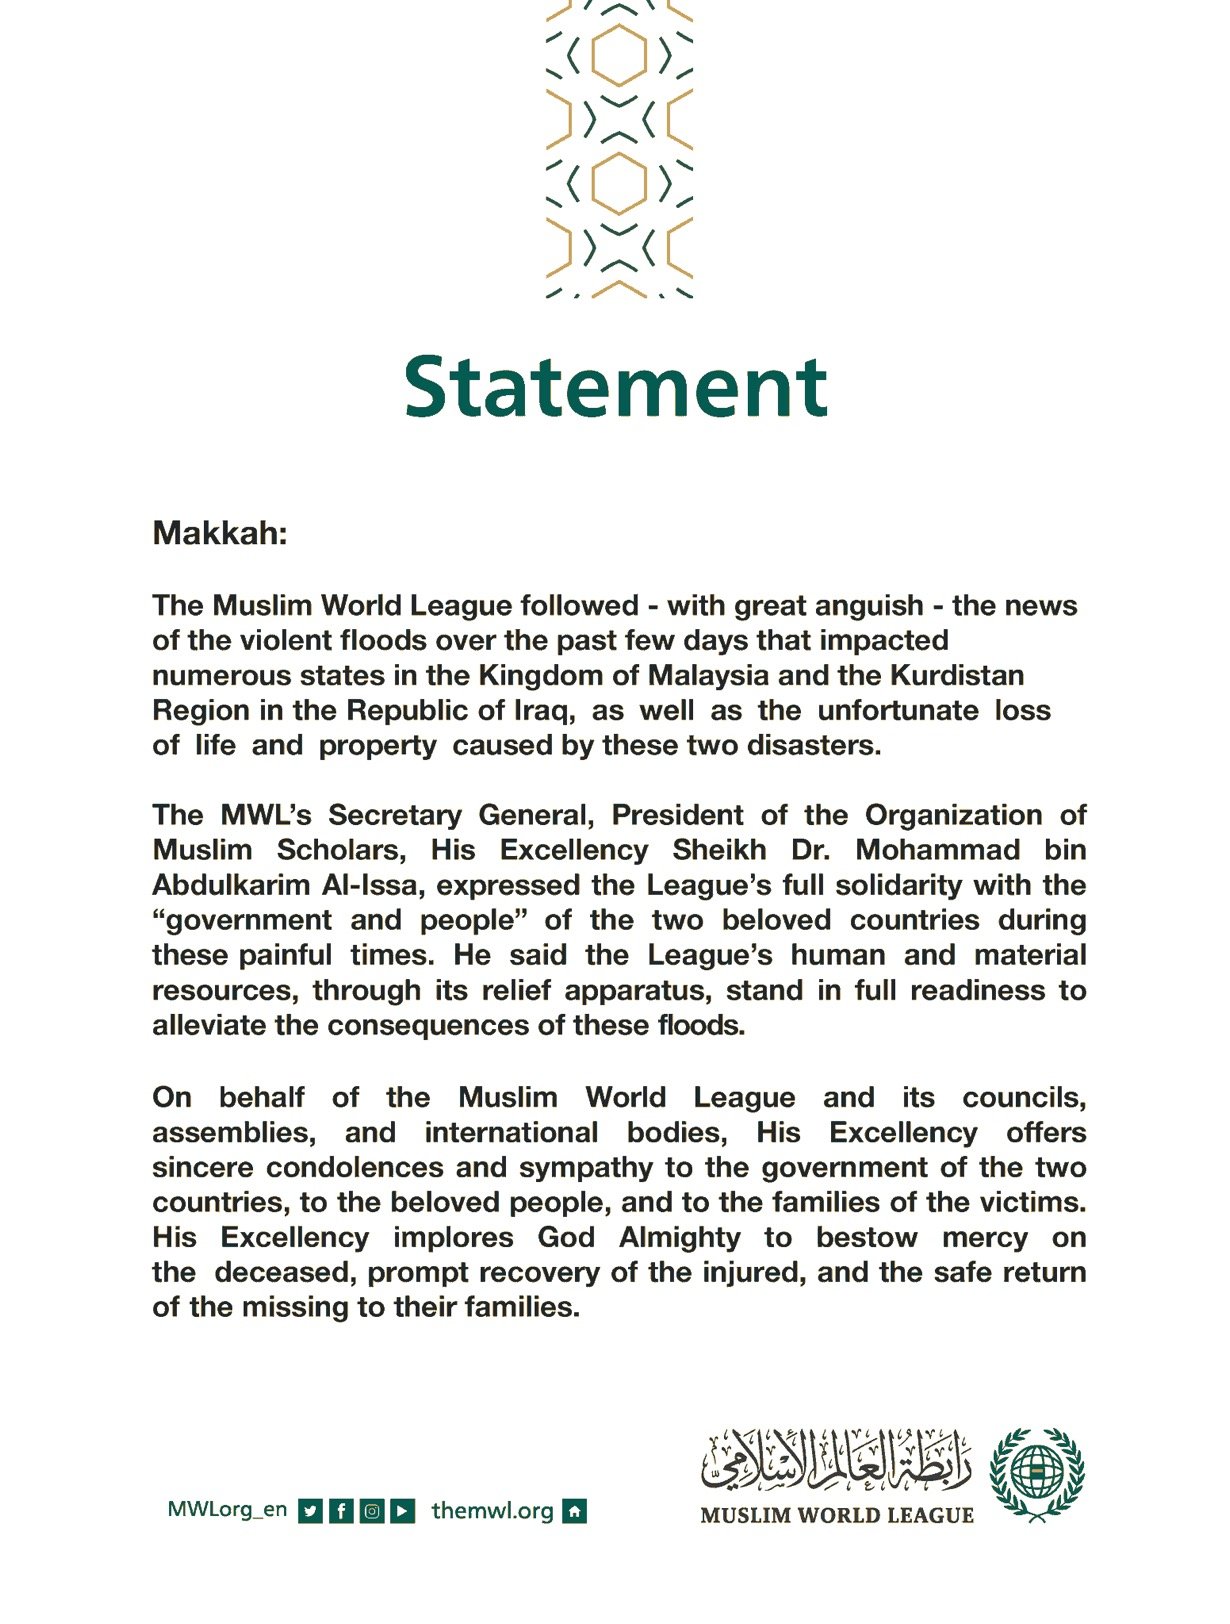 Statement from the Muslim World League on the floods in the Kingdom of Malaysia and the Kurdistan Region in the Republic of Iraq: